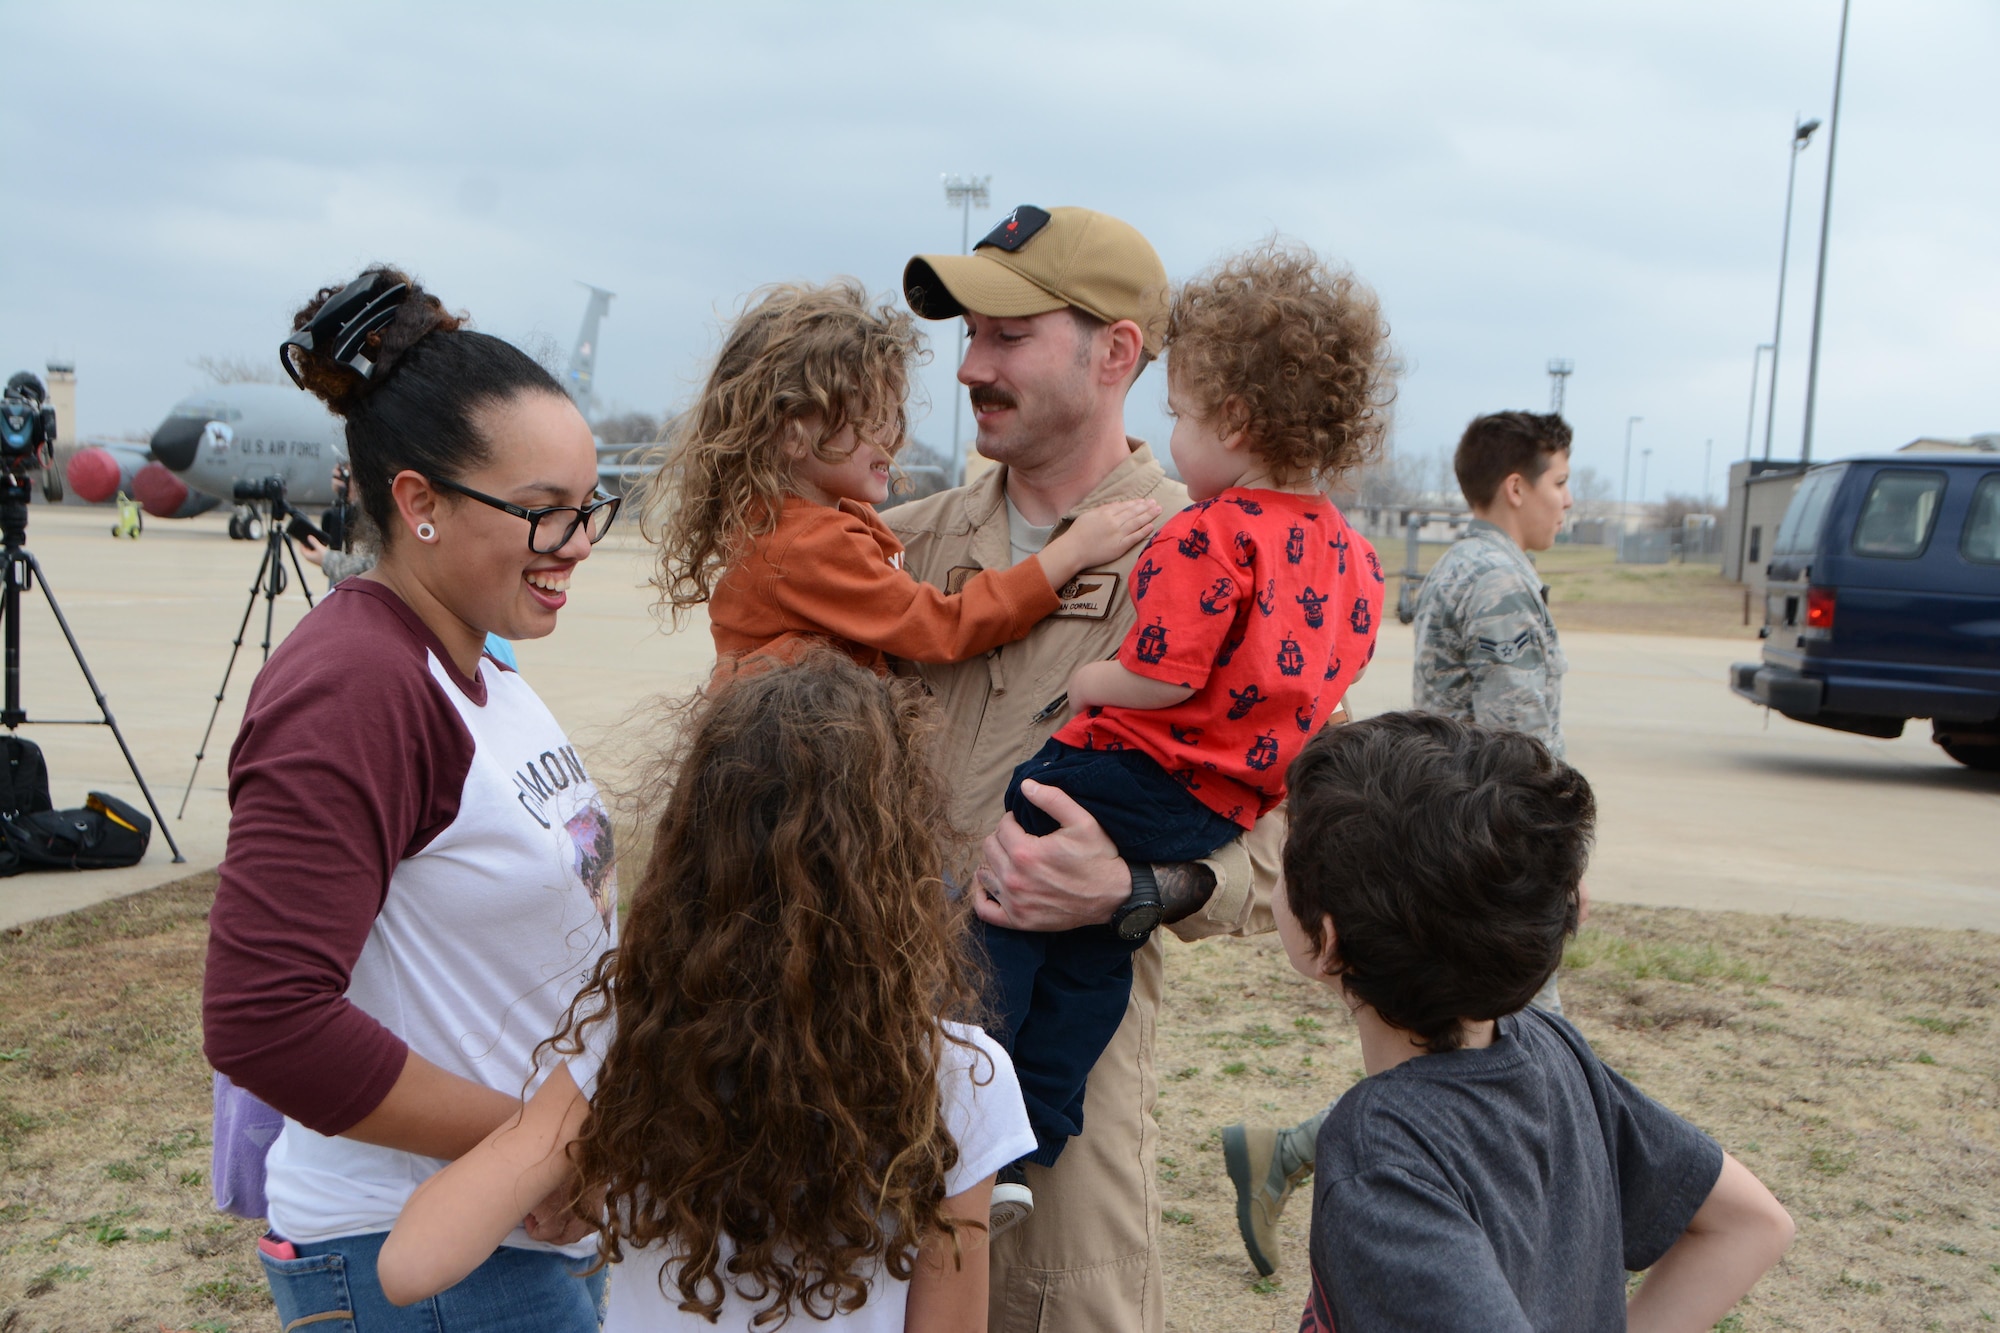 Tech. Sgt. Ryan Cornell of the 465th Air Refueling Squadron reunites with his  family following a deployment Feb. 19, 2017, at Tinker Air Force Base, Okla. More than 90 Reservists deployed in December 2016 in support of air operations at Incirlik Air Base, Turkey, against the Islamic State group. (U.S. Air Force photo/Tech. Sgt. Lauren Gleason)